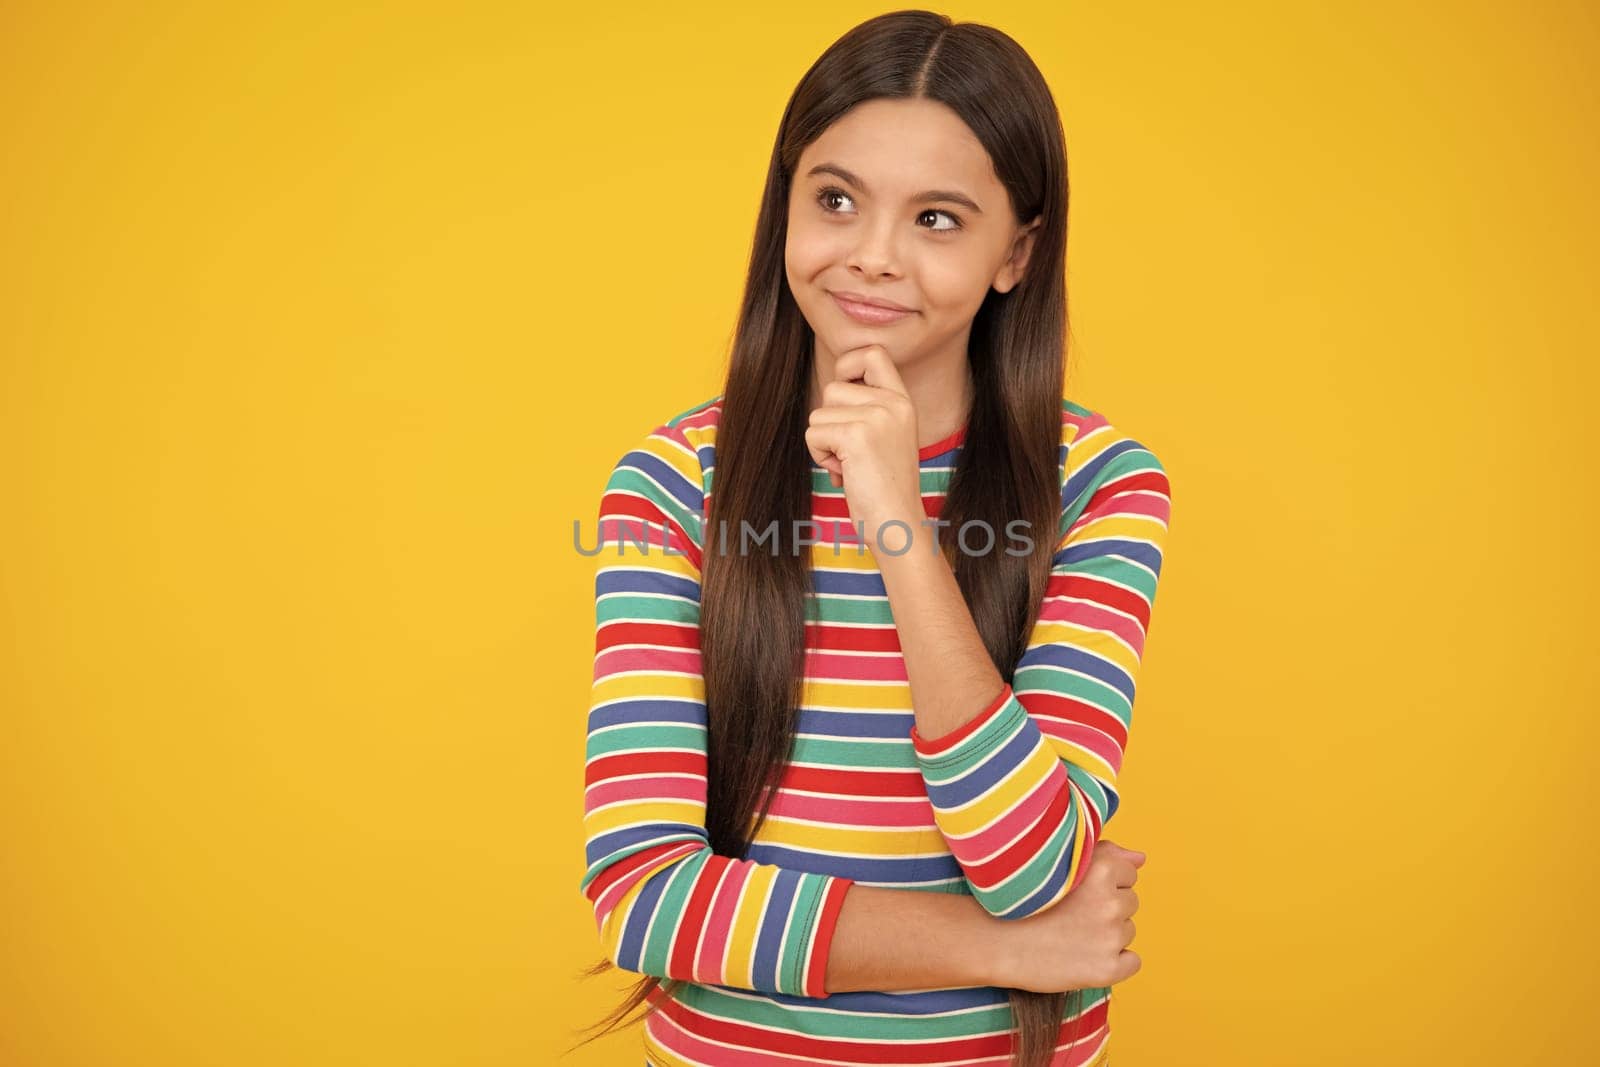 Funny face. Teenager girl 12, 13, 14 years old thinking against yellow background. Child think and creative idea concept. by RedFoxStudio